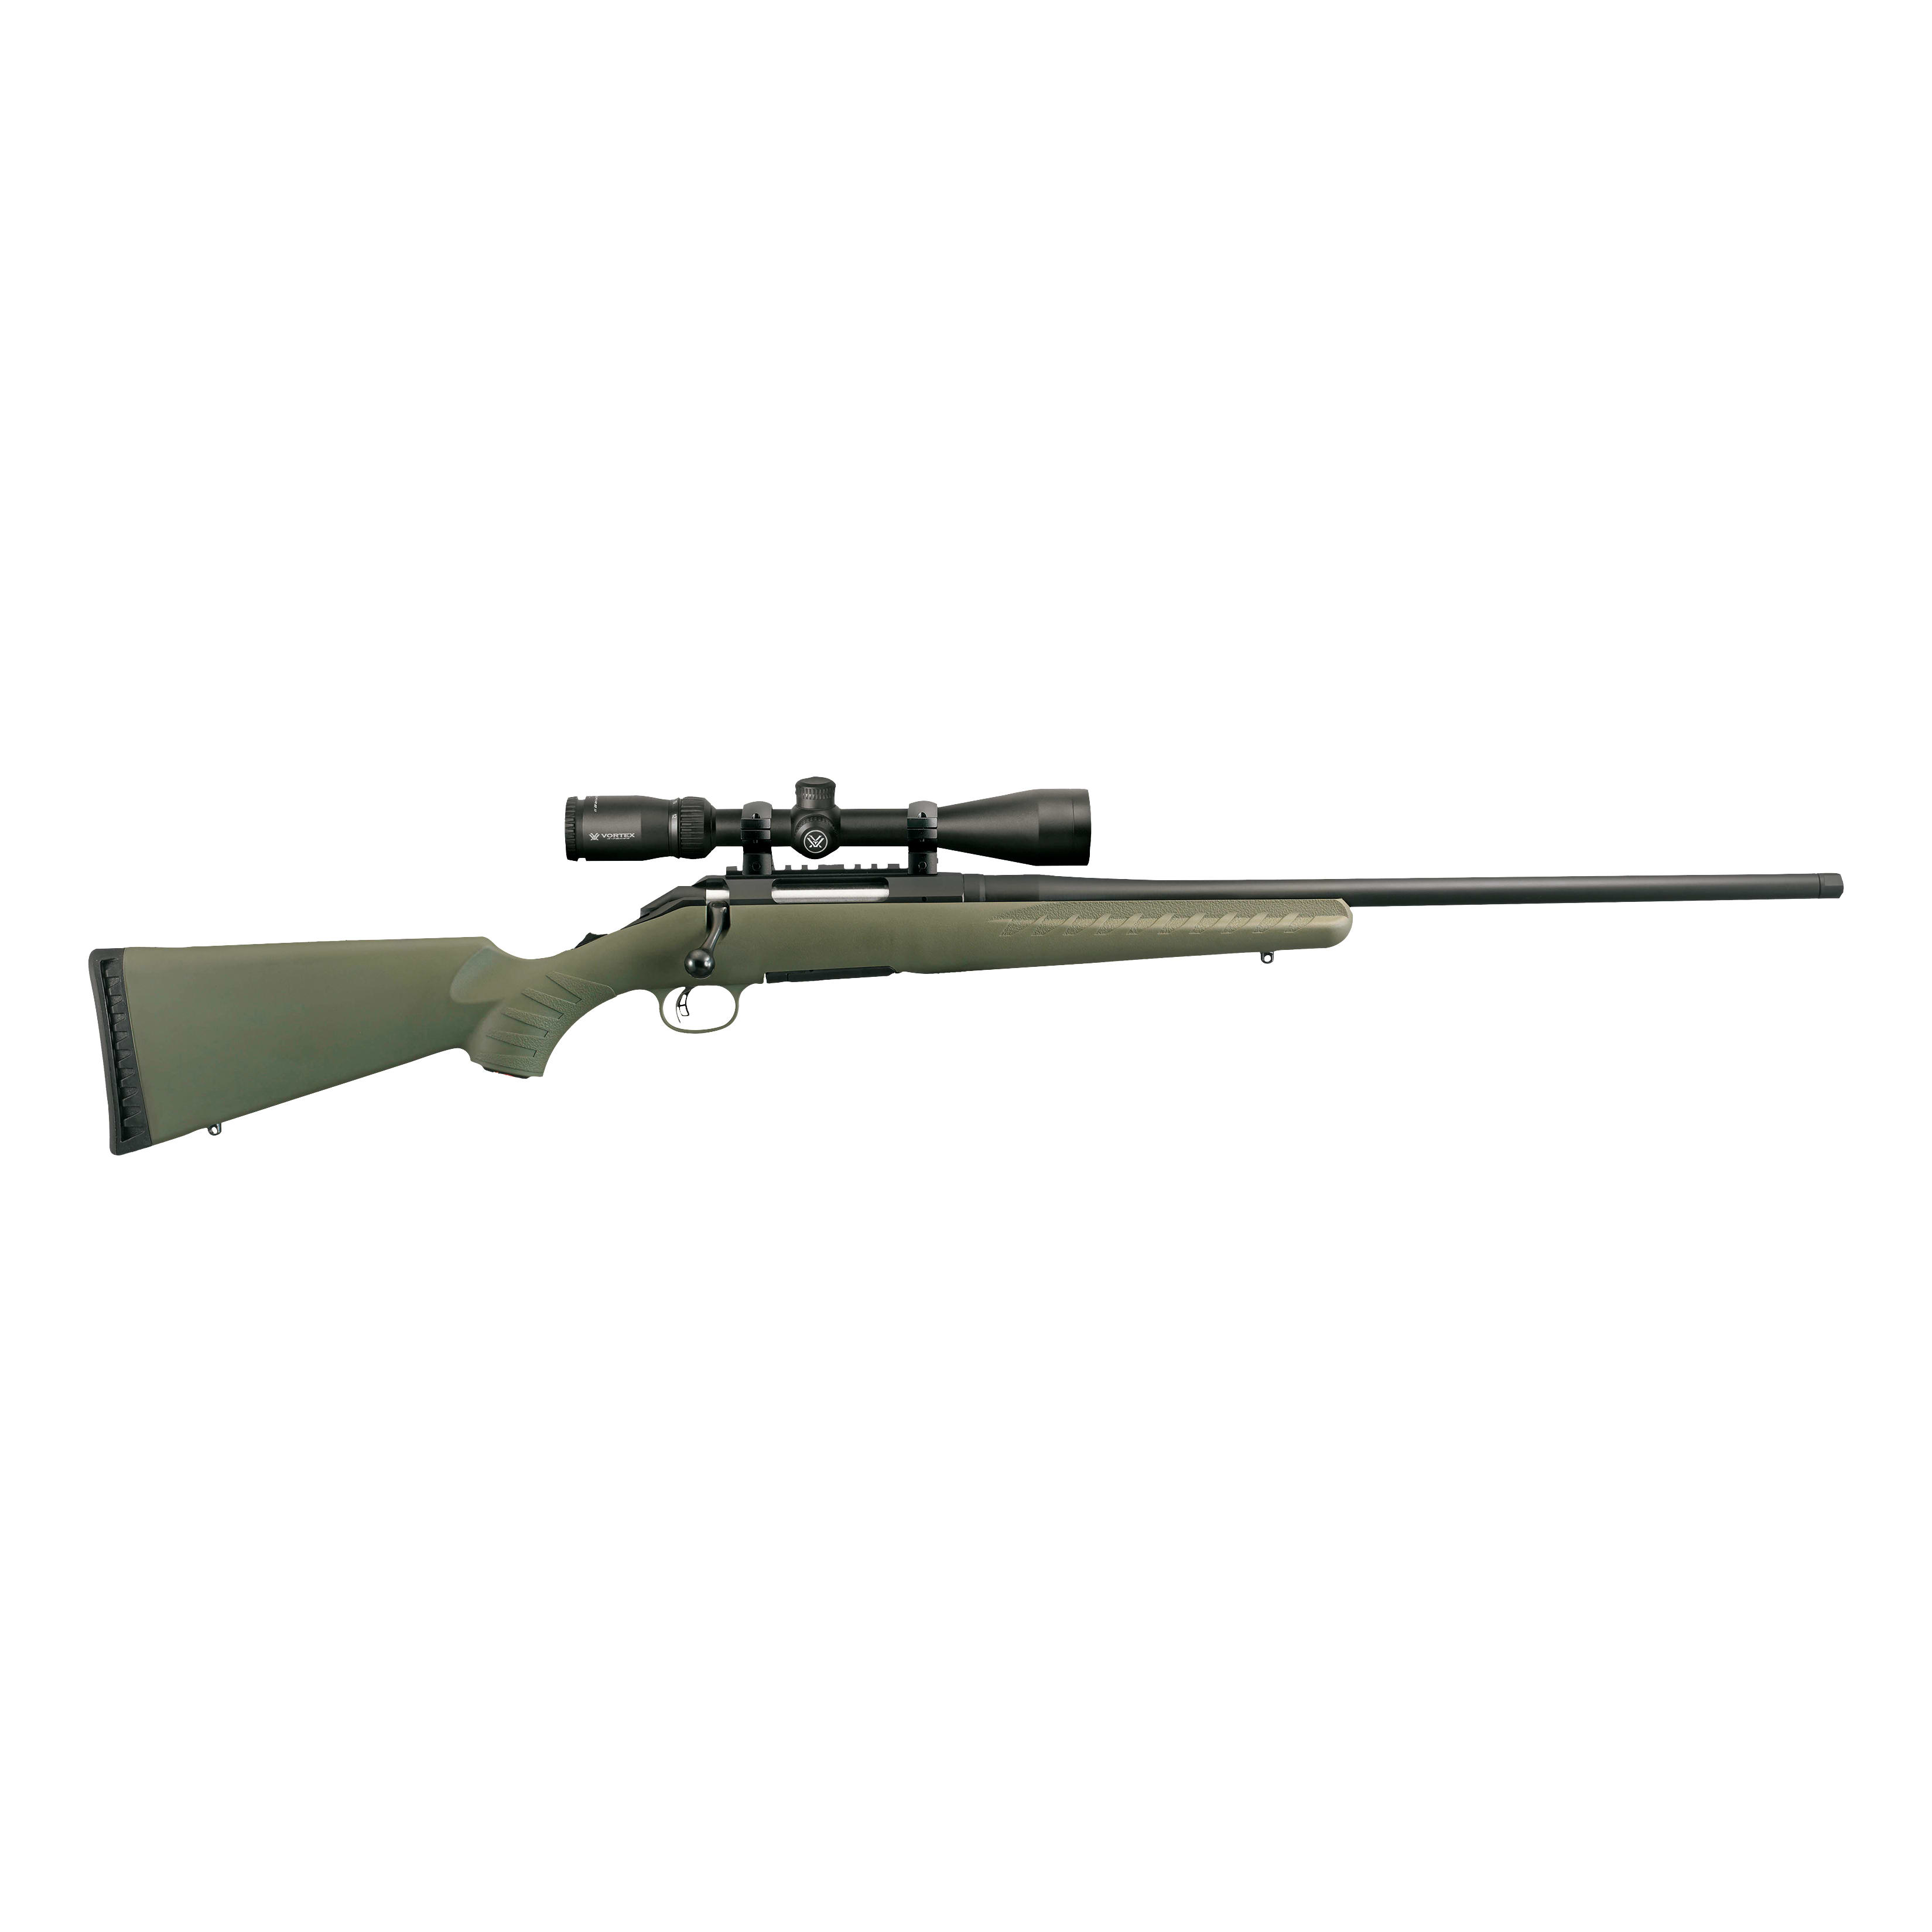 Ruger 16953 American Bolt Action Rifle Combo, 6.5 Creedmoor, RH, 22" BBL, Moss Green Synthetic Stock, Vortex Scope 4-12x44 , 5-Round, 0604-1997